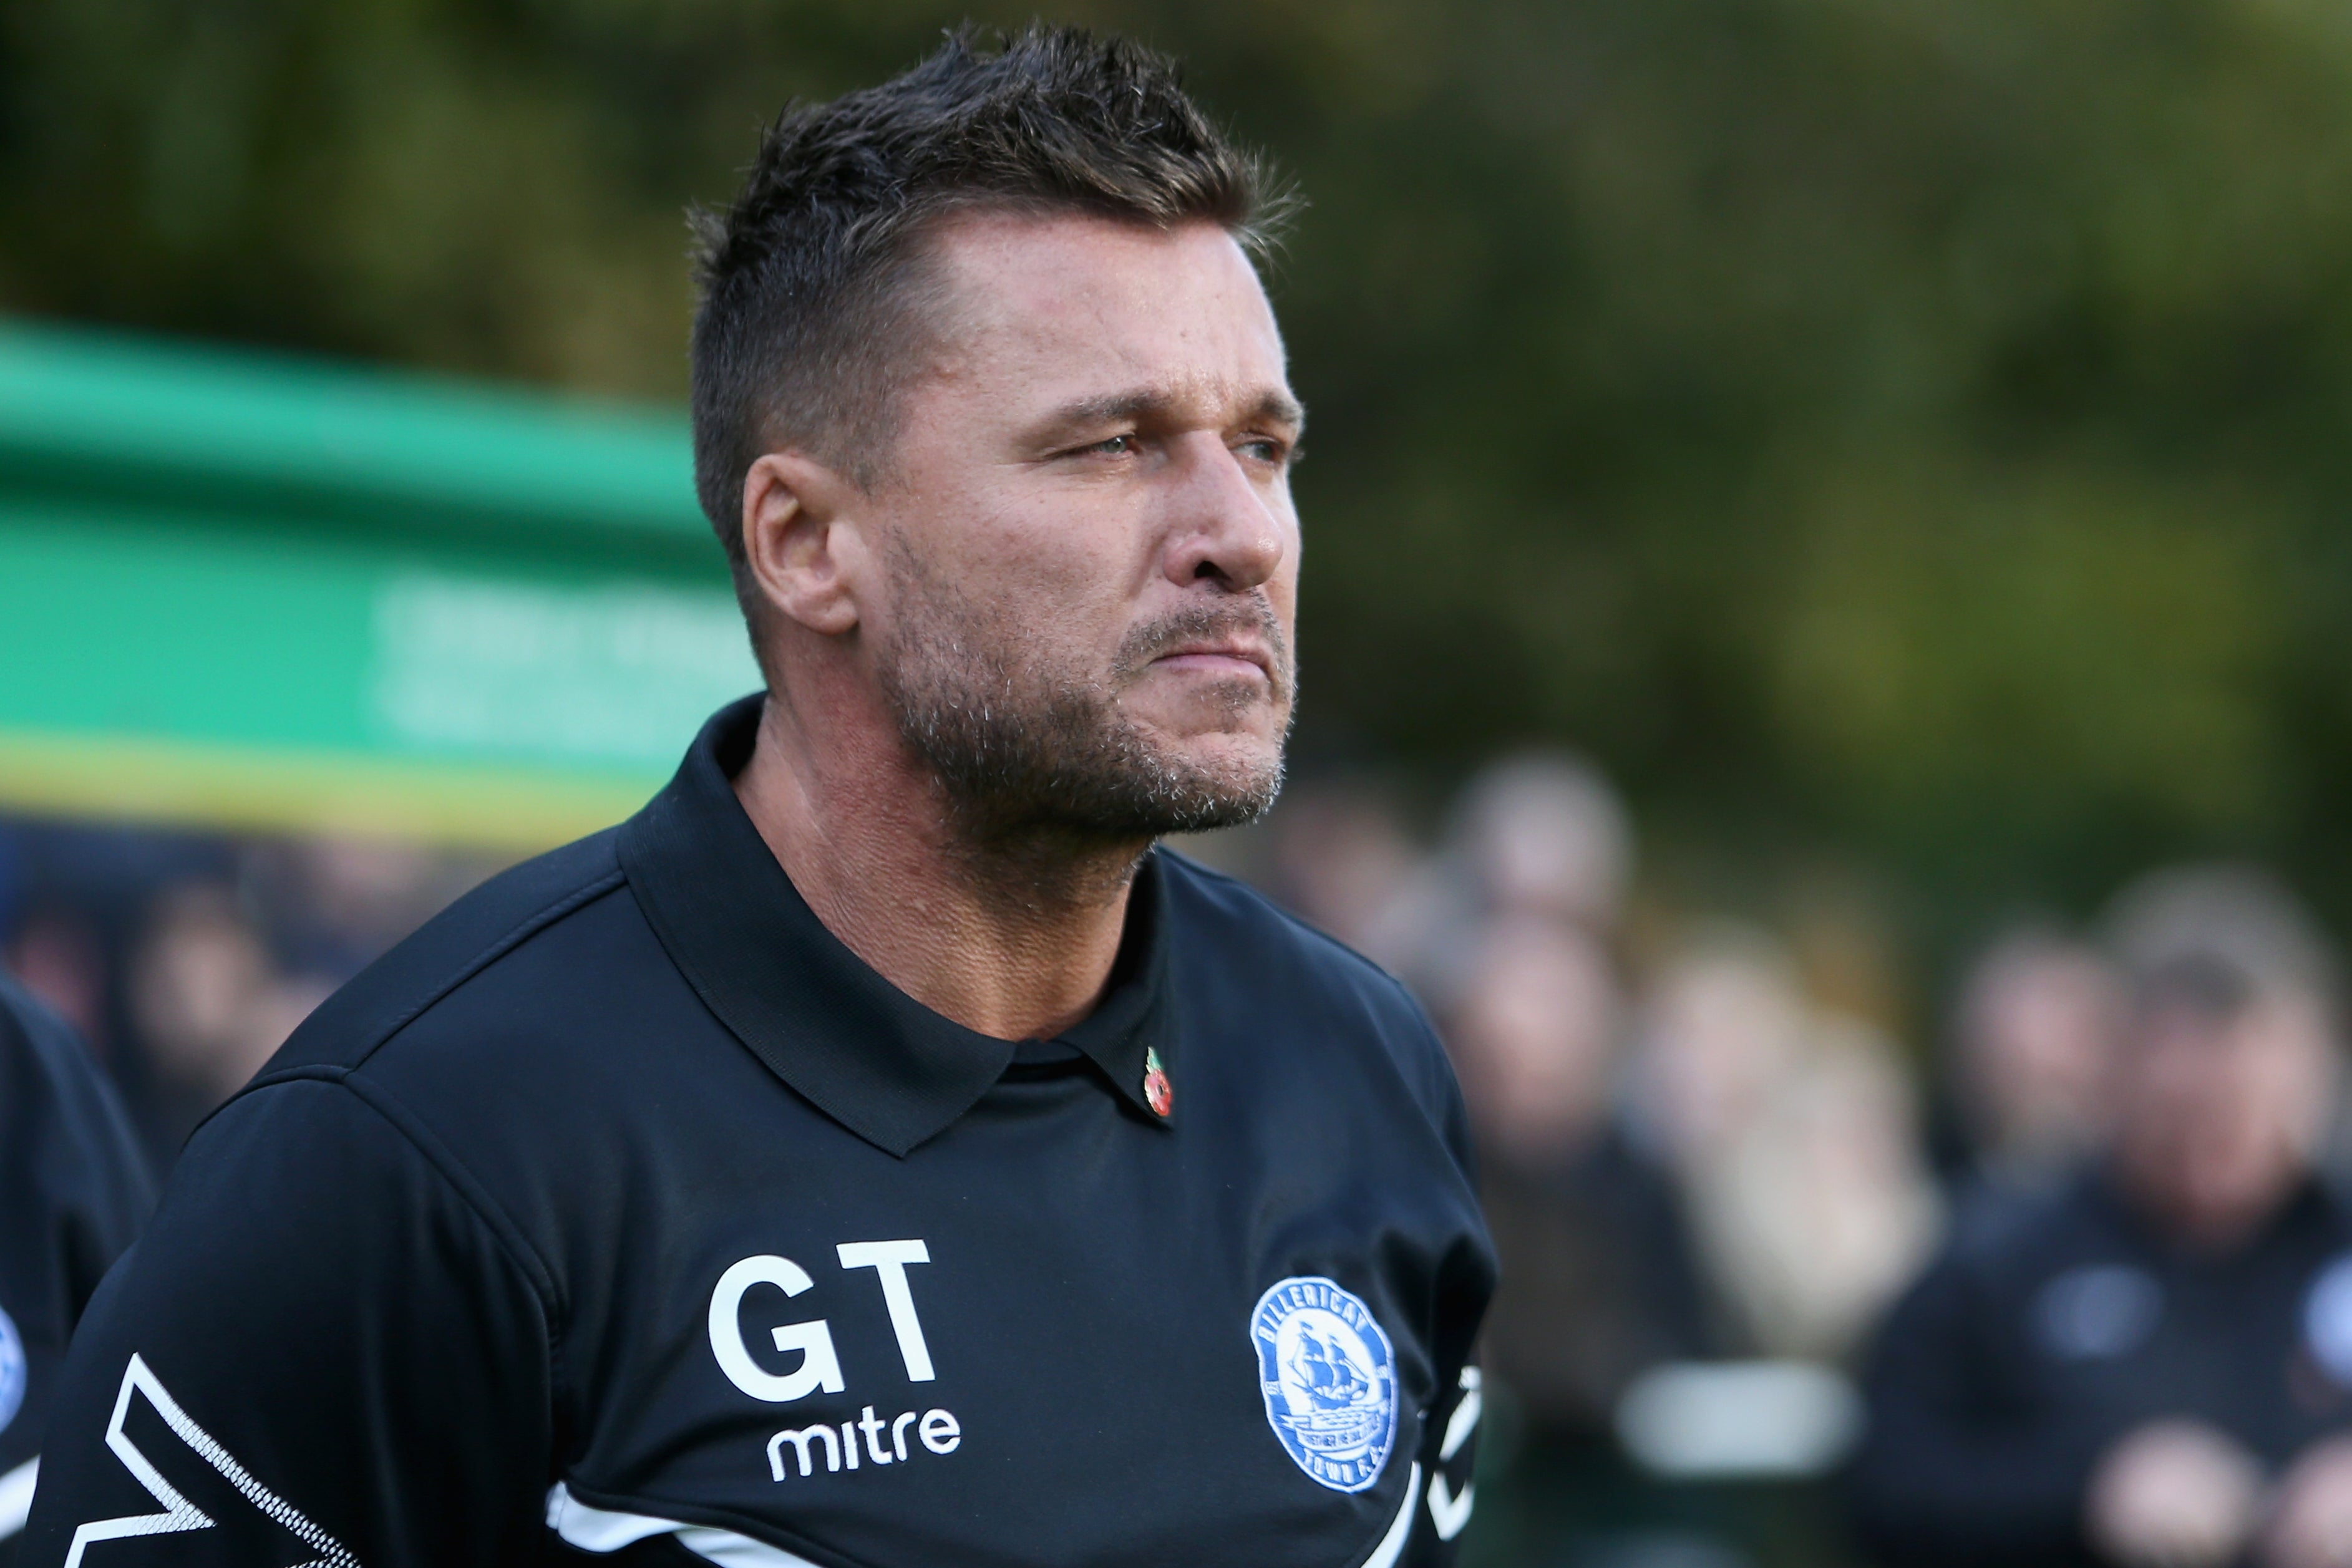 Glenn Tamplin used to own Billericay Town